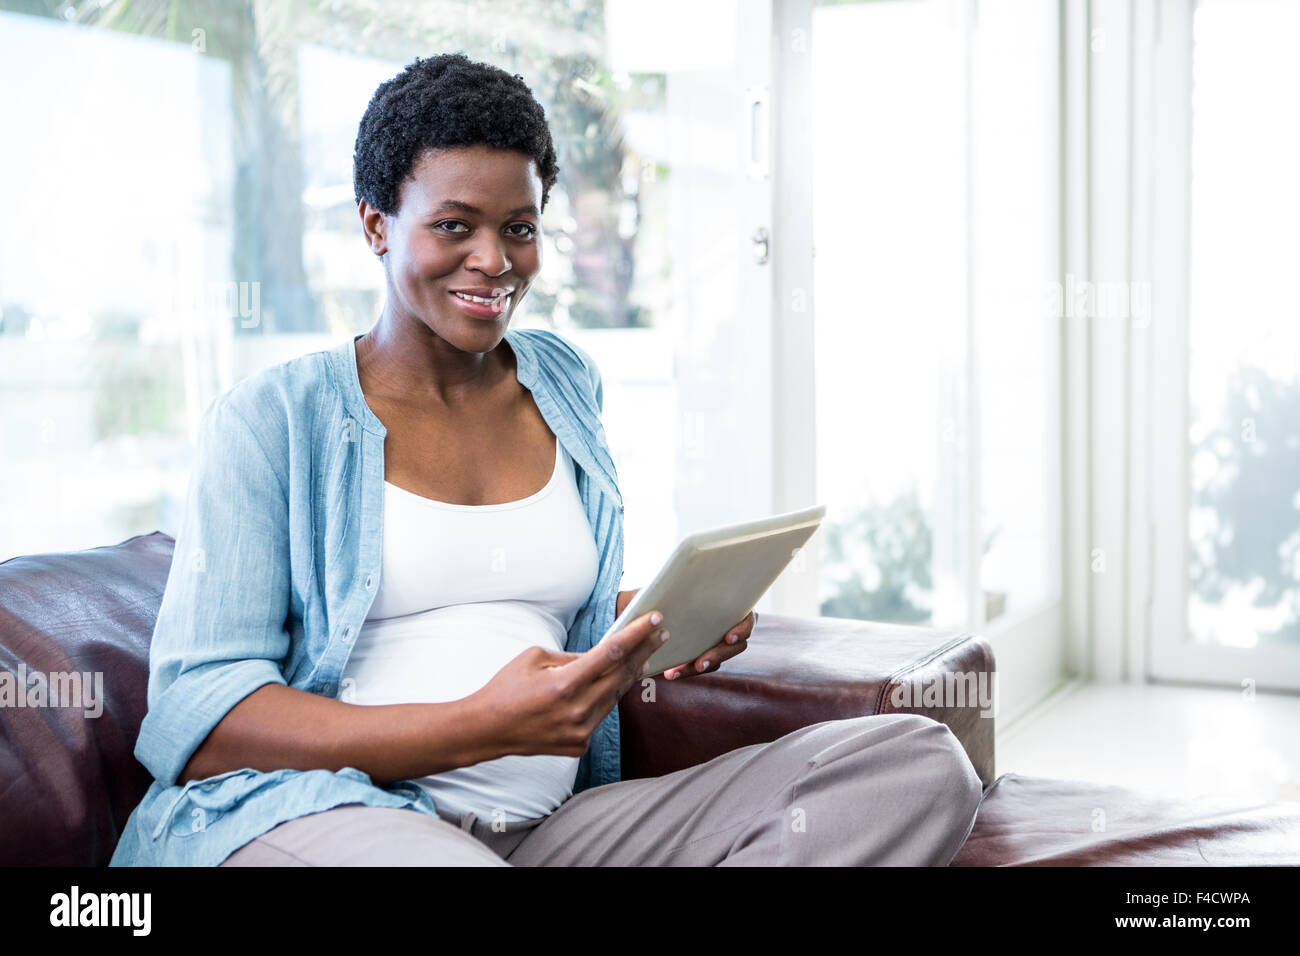 Happy woman using her tablet pc Stock Photo